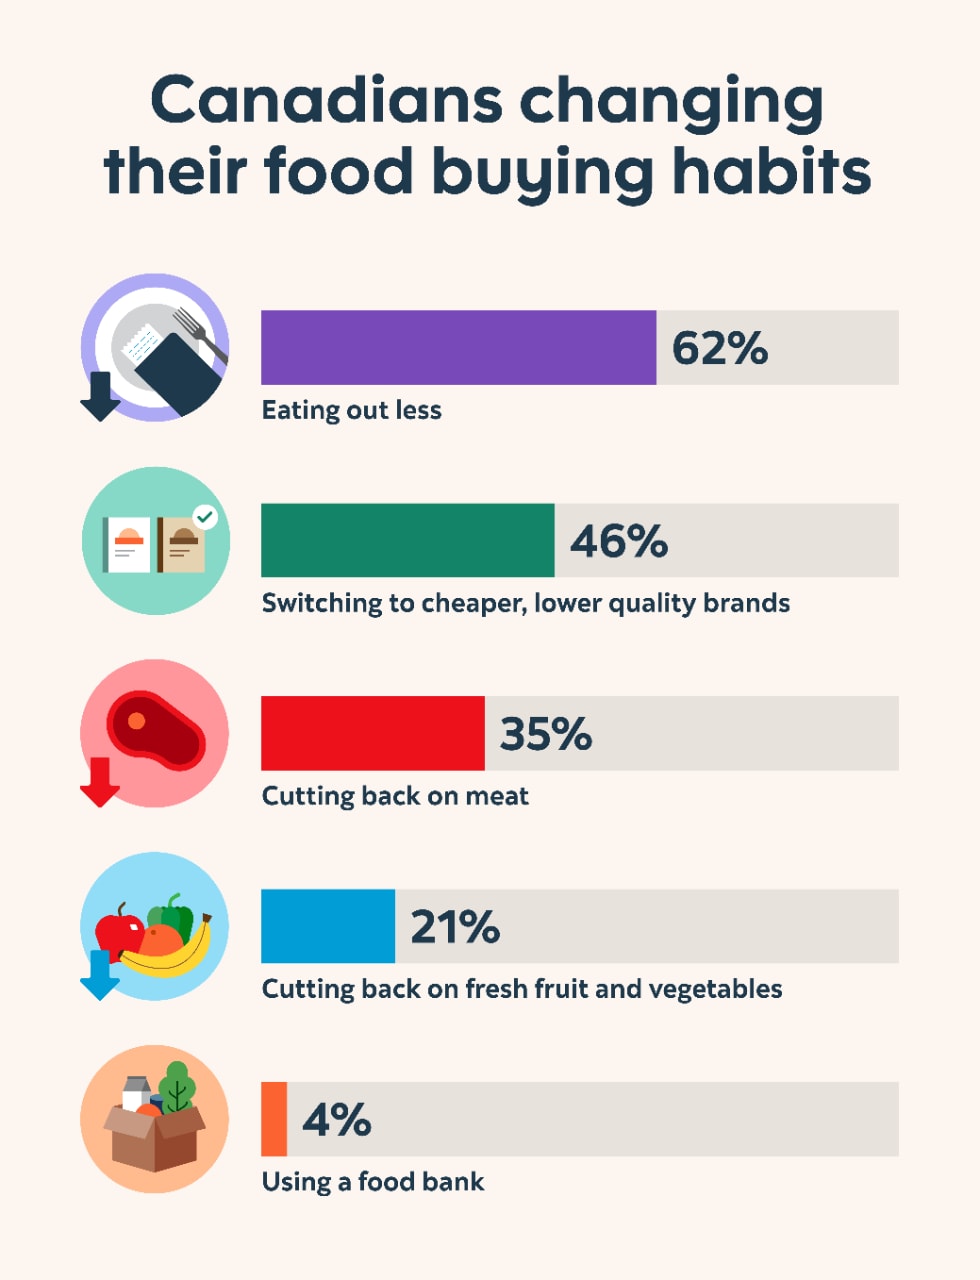 Canadians changing their food buying habits: 62% are eating out less, 46% are switching to cheaper, lower quality brands, 35% are cutting back on meat, 21% are cutting back on fresh fruit and vegetables, and 4% are using a food bank.